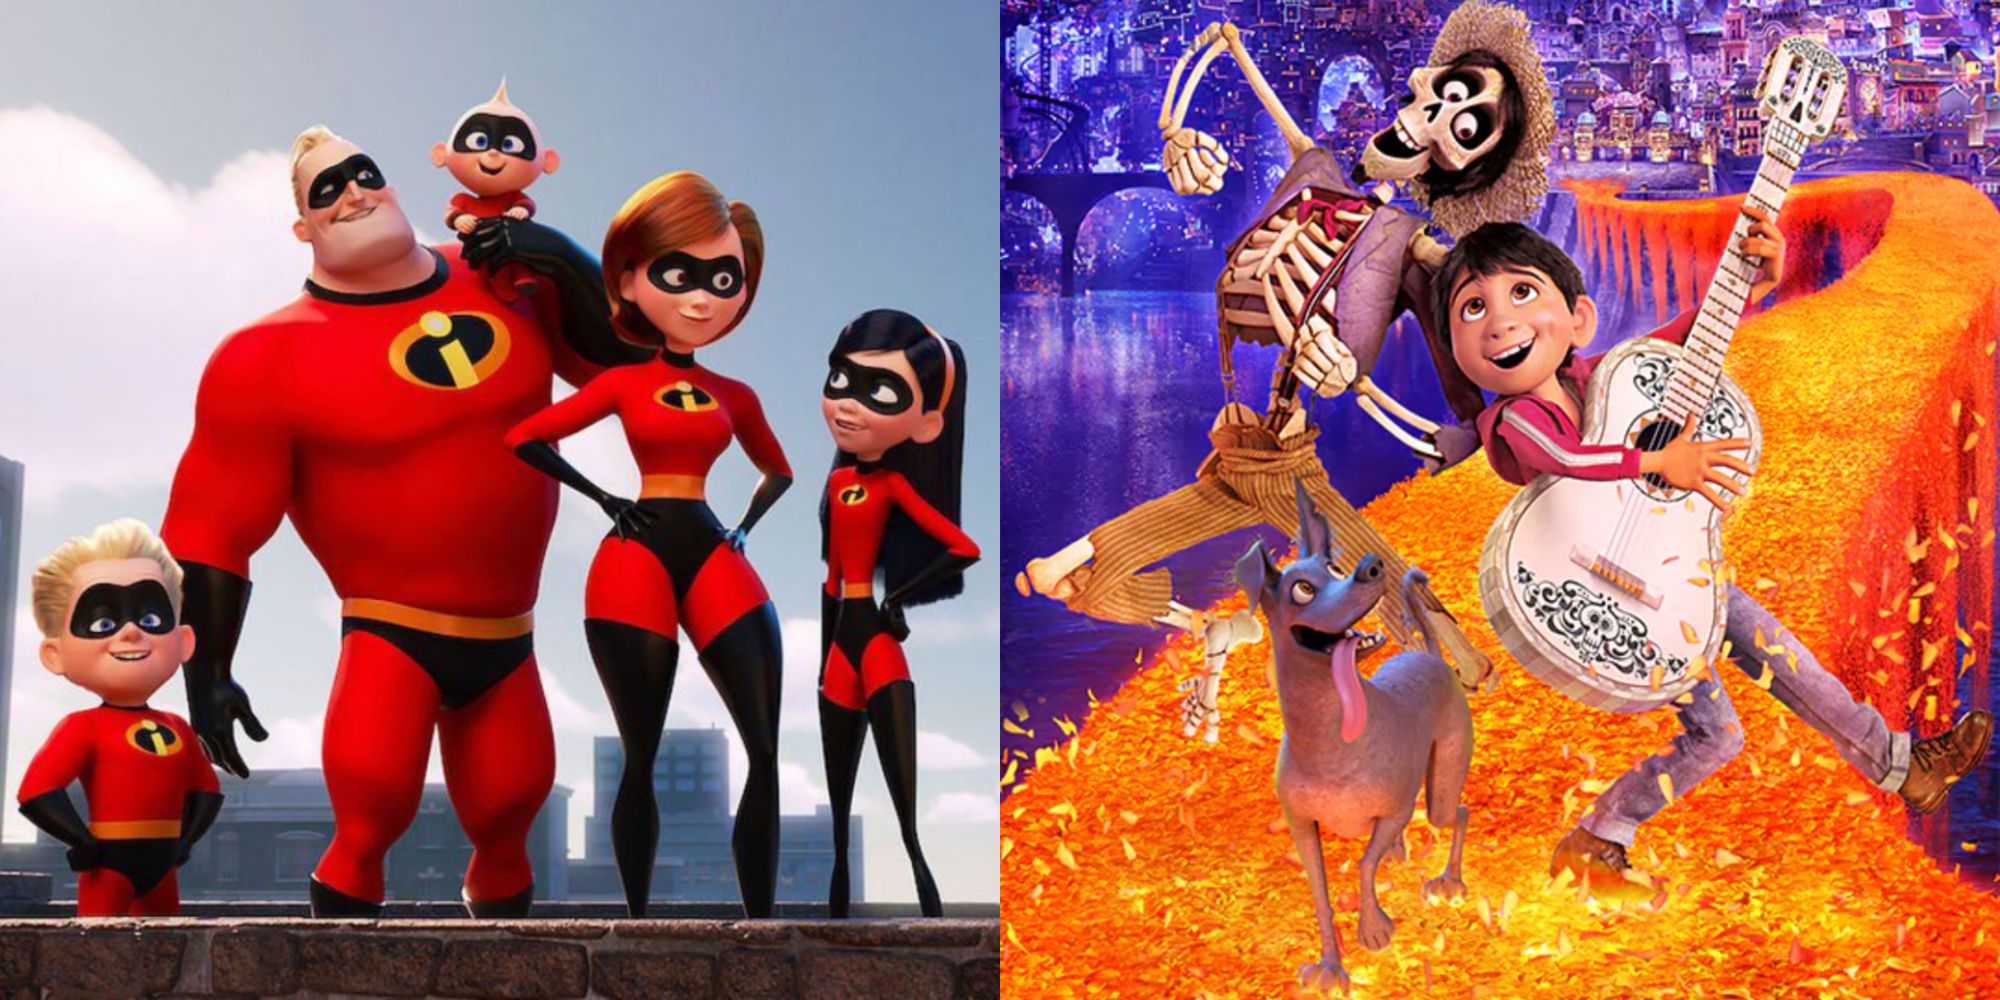 Split image showing characters from The Incredibles and Coco.